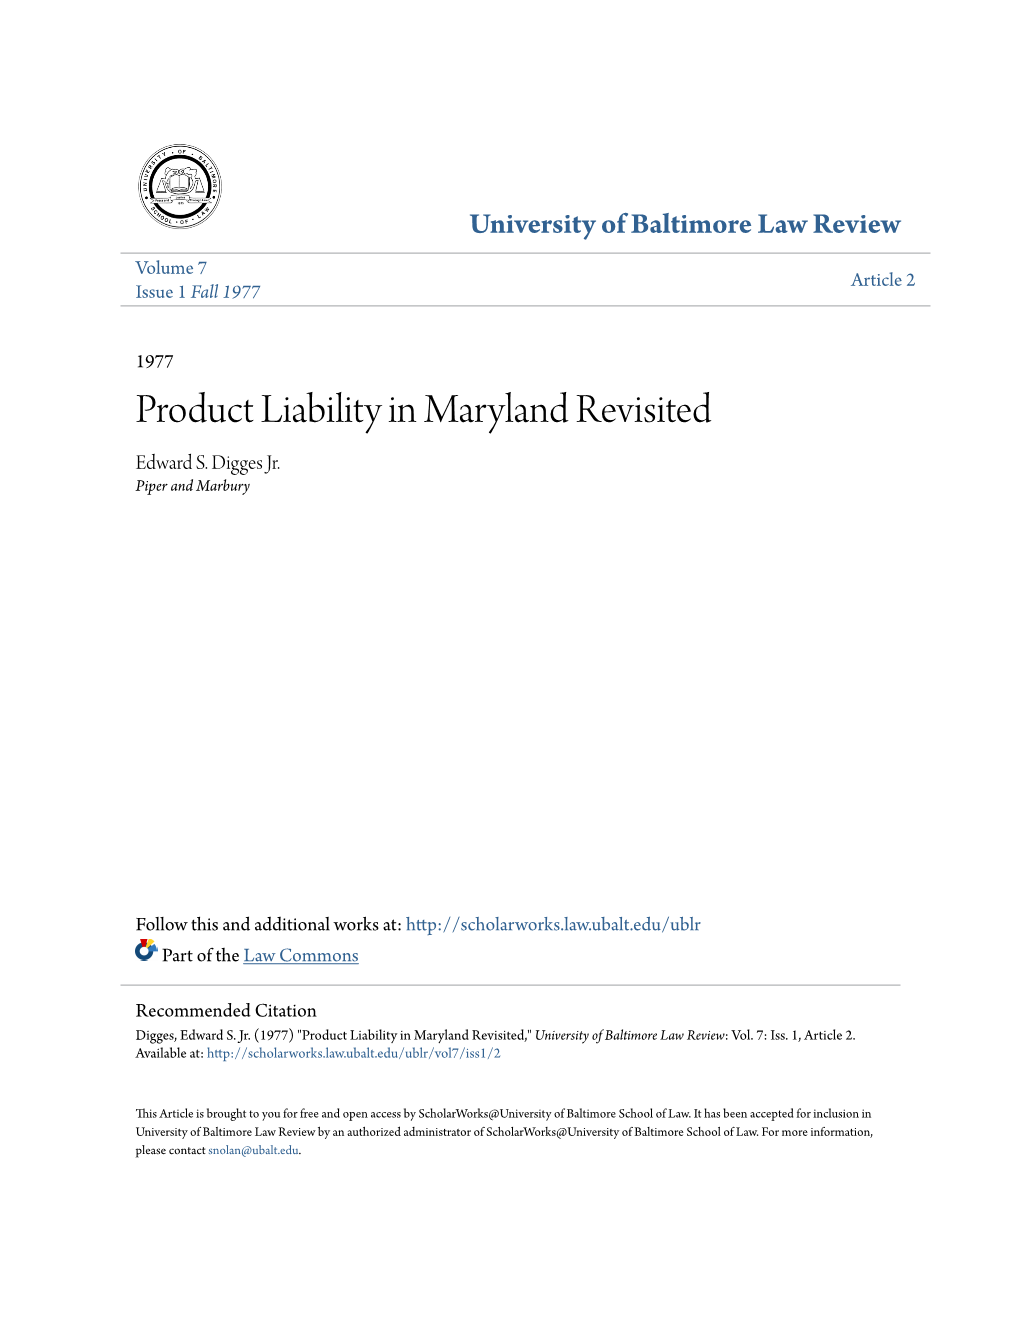 Product Liability in Maryland Revisited Edward S